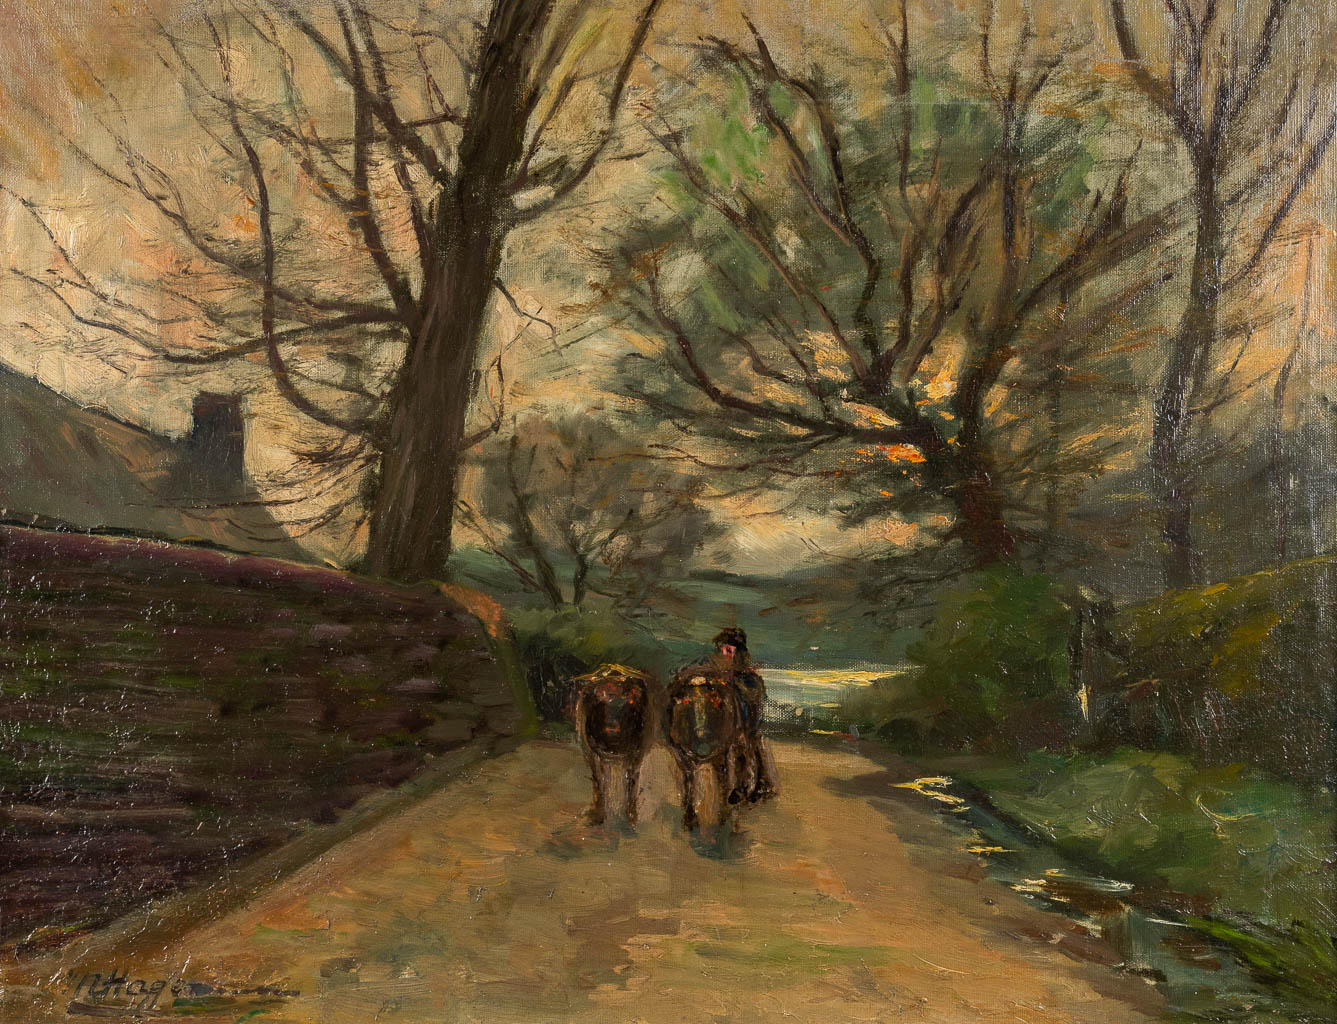 Maurice HAGEMANS (1852-1917) 'The Road' oil on canvas. (W:66 x H:50 cm)